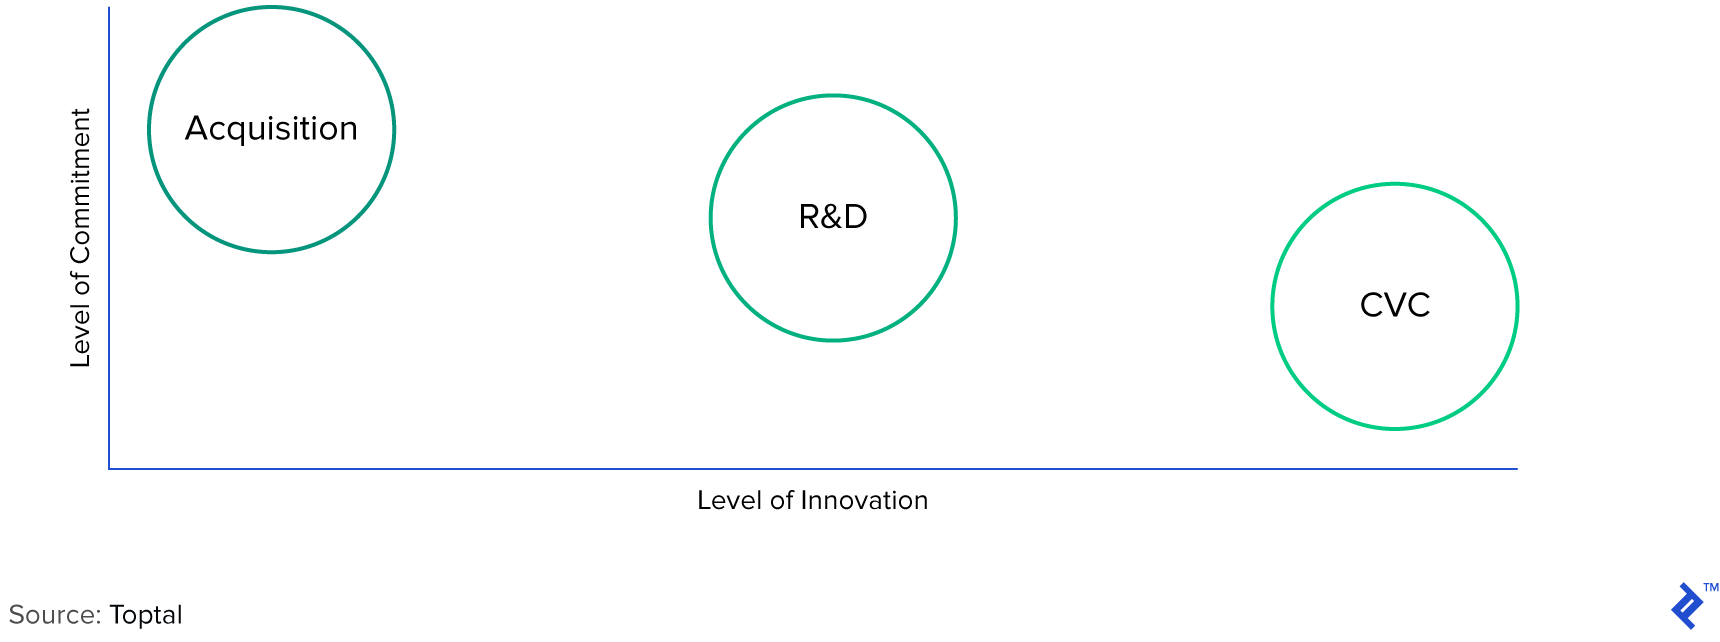 Level of Commitment vs. Level of Innovation: Acquisition, R&D, and Corporate VC (First Interaction)